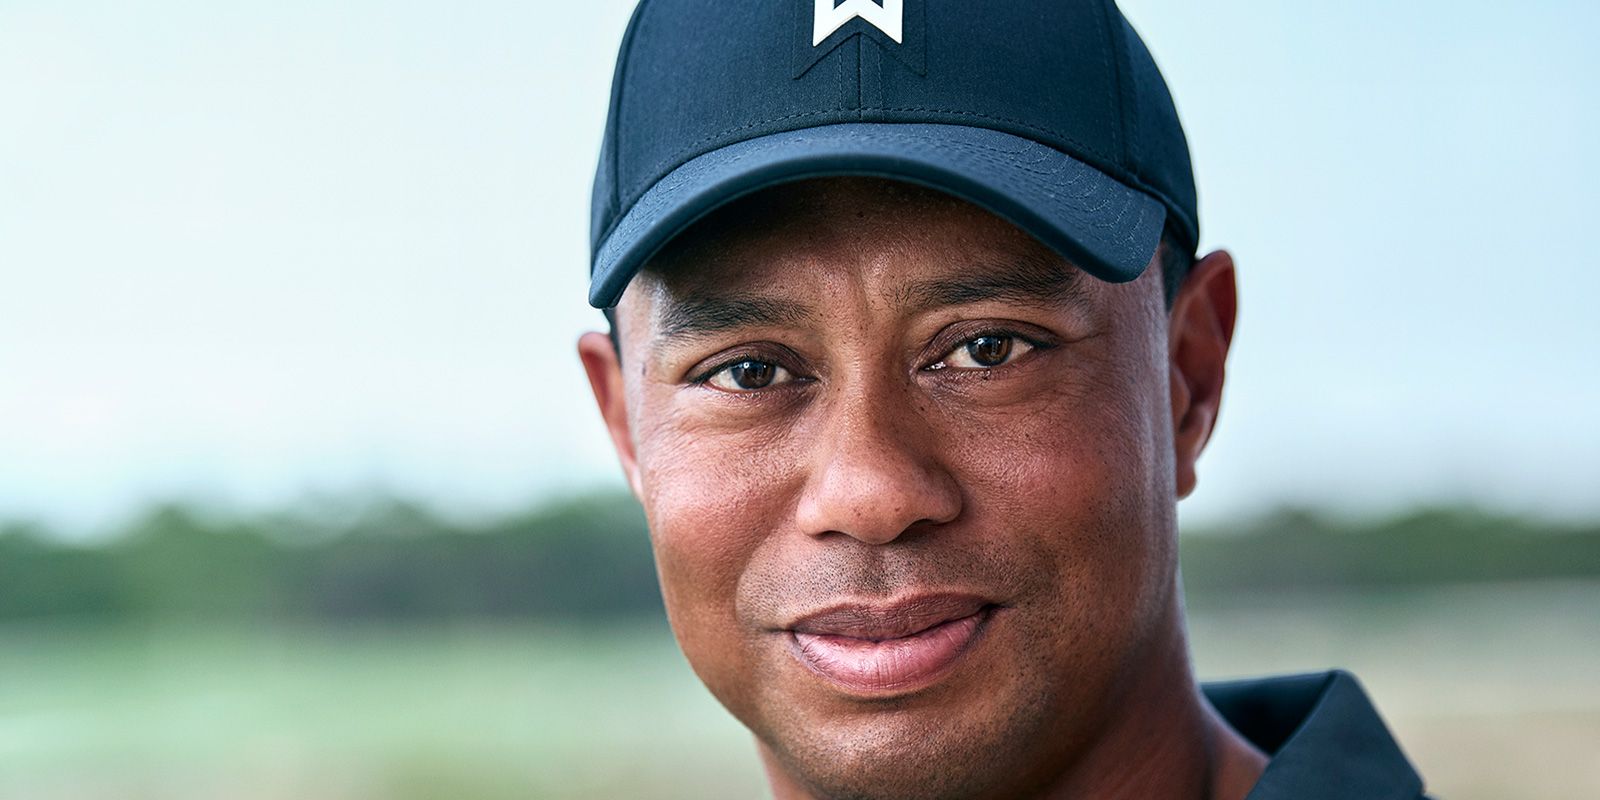 Tiger is set to return to the Masters, and a new generation of fans will be watching